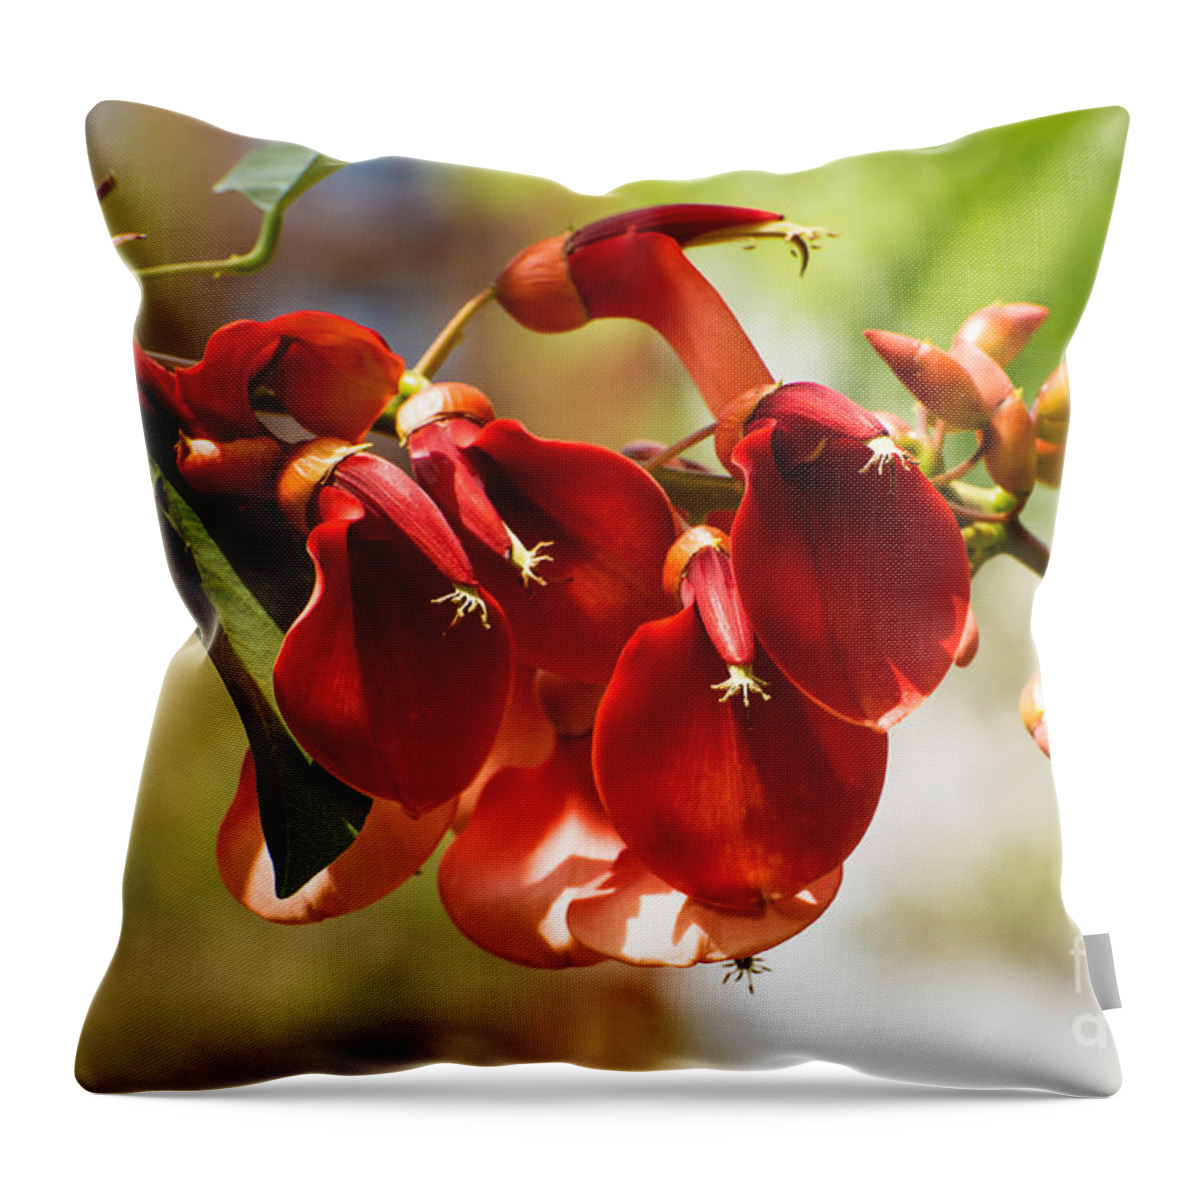 Cockspur Coral Tree Flowers Throw Pillow featuring the photograph Cockspur Coral Tree Flowers by Mary Jane Armstrong